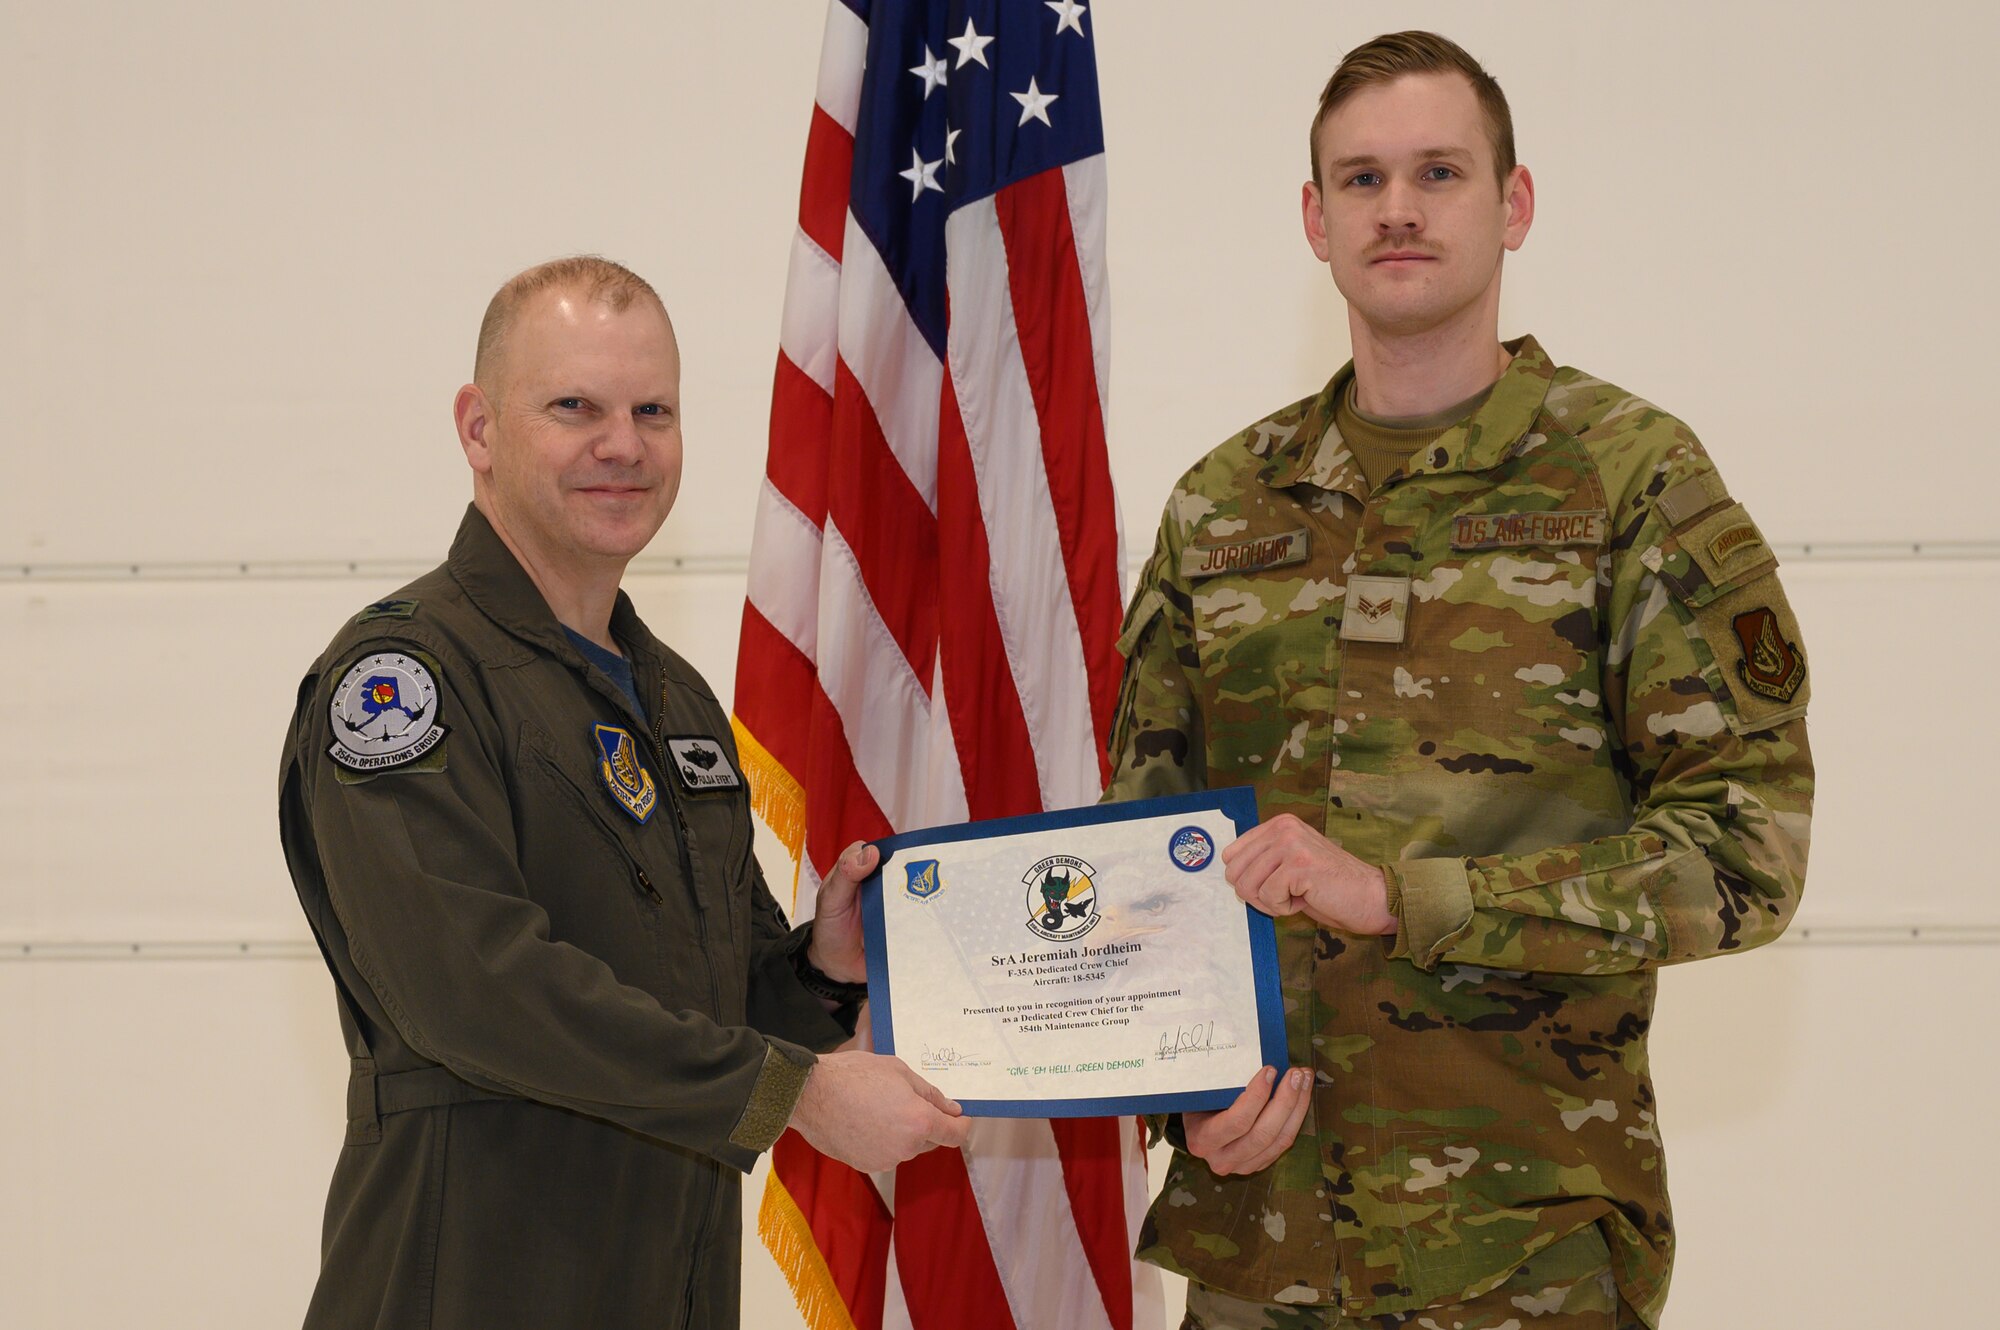 U.S. Air Force Col. Gage Evert, 354th Operations Group commander, poses for a photo with Senior Airman Jeremiah Jordheim, a 356th Aircraft Maintenance Unit crew chief, during a ceremony on Eielson Air Force Base, Alaska, Jan. 6, 2023.